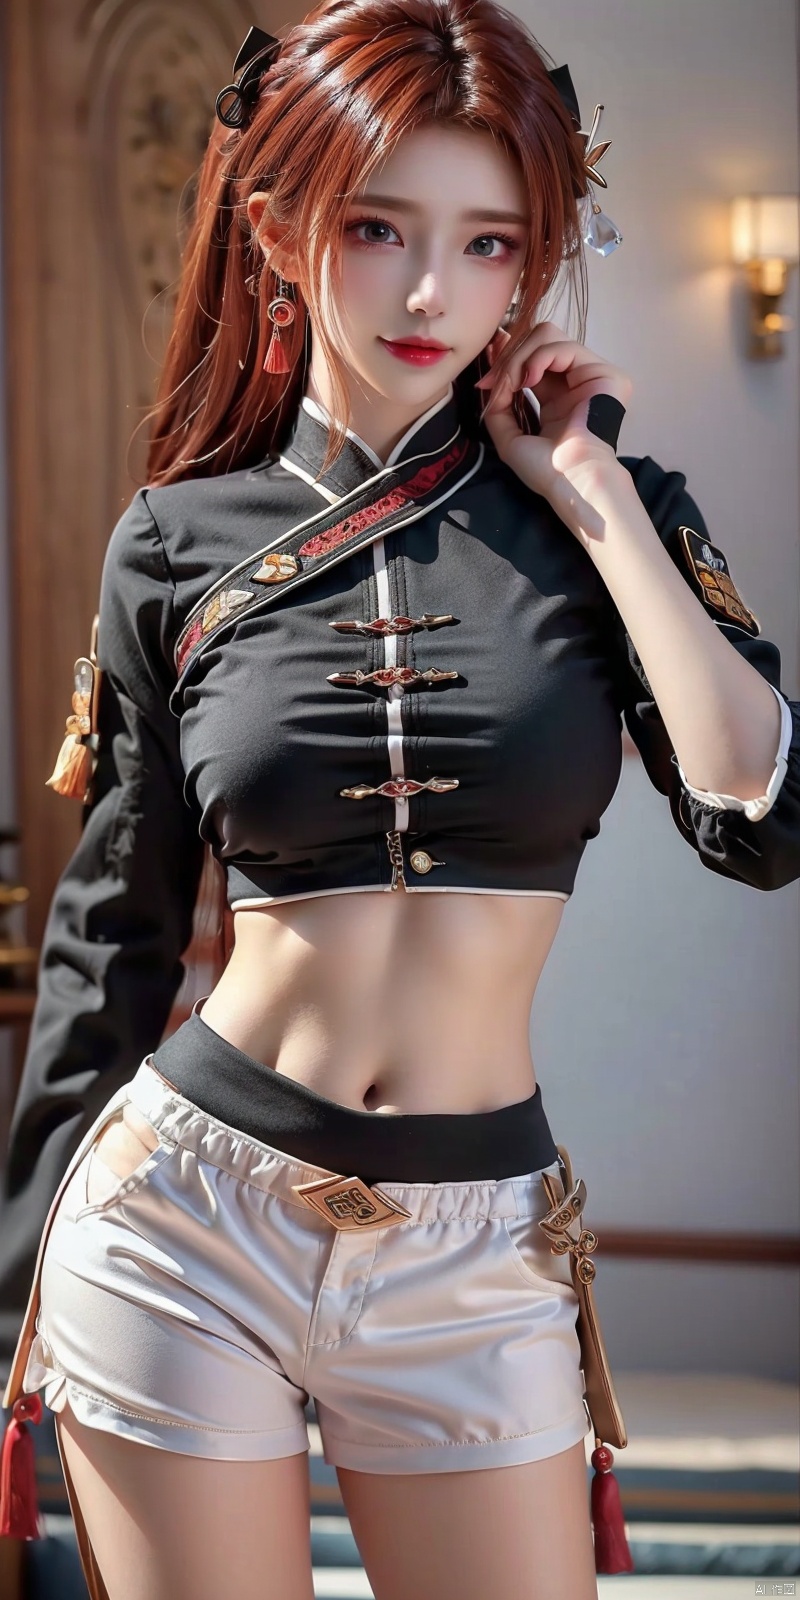  DSLR, (Good structure), ,High quality, masterpiece, 1Girl, Earstuds, blue eyes,Earstuds, blue eyes, black hair, (translucent white police uniform ), navel exposed, (translucent shorts ), thigh exposed, (supermodel pose),smile,(solo),（Different postures）,red hair,(Perfect hand lines),, 1 girl, , (\meng ze\), ((poakl)), yefei,looking_at_viewer,kind smile,Dynamic pose